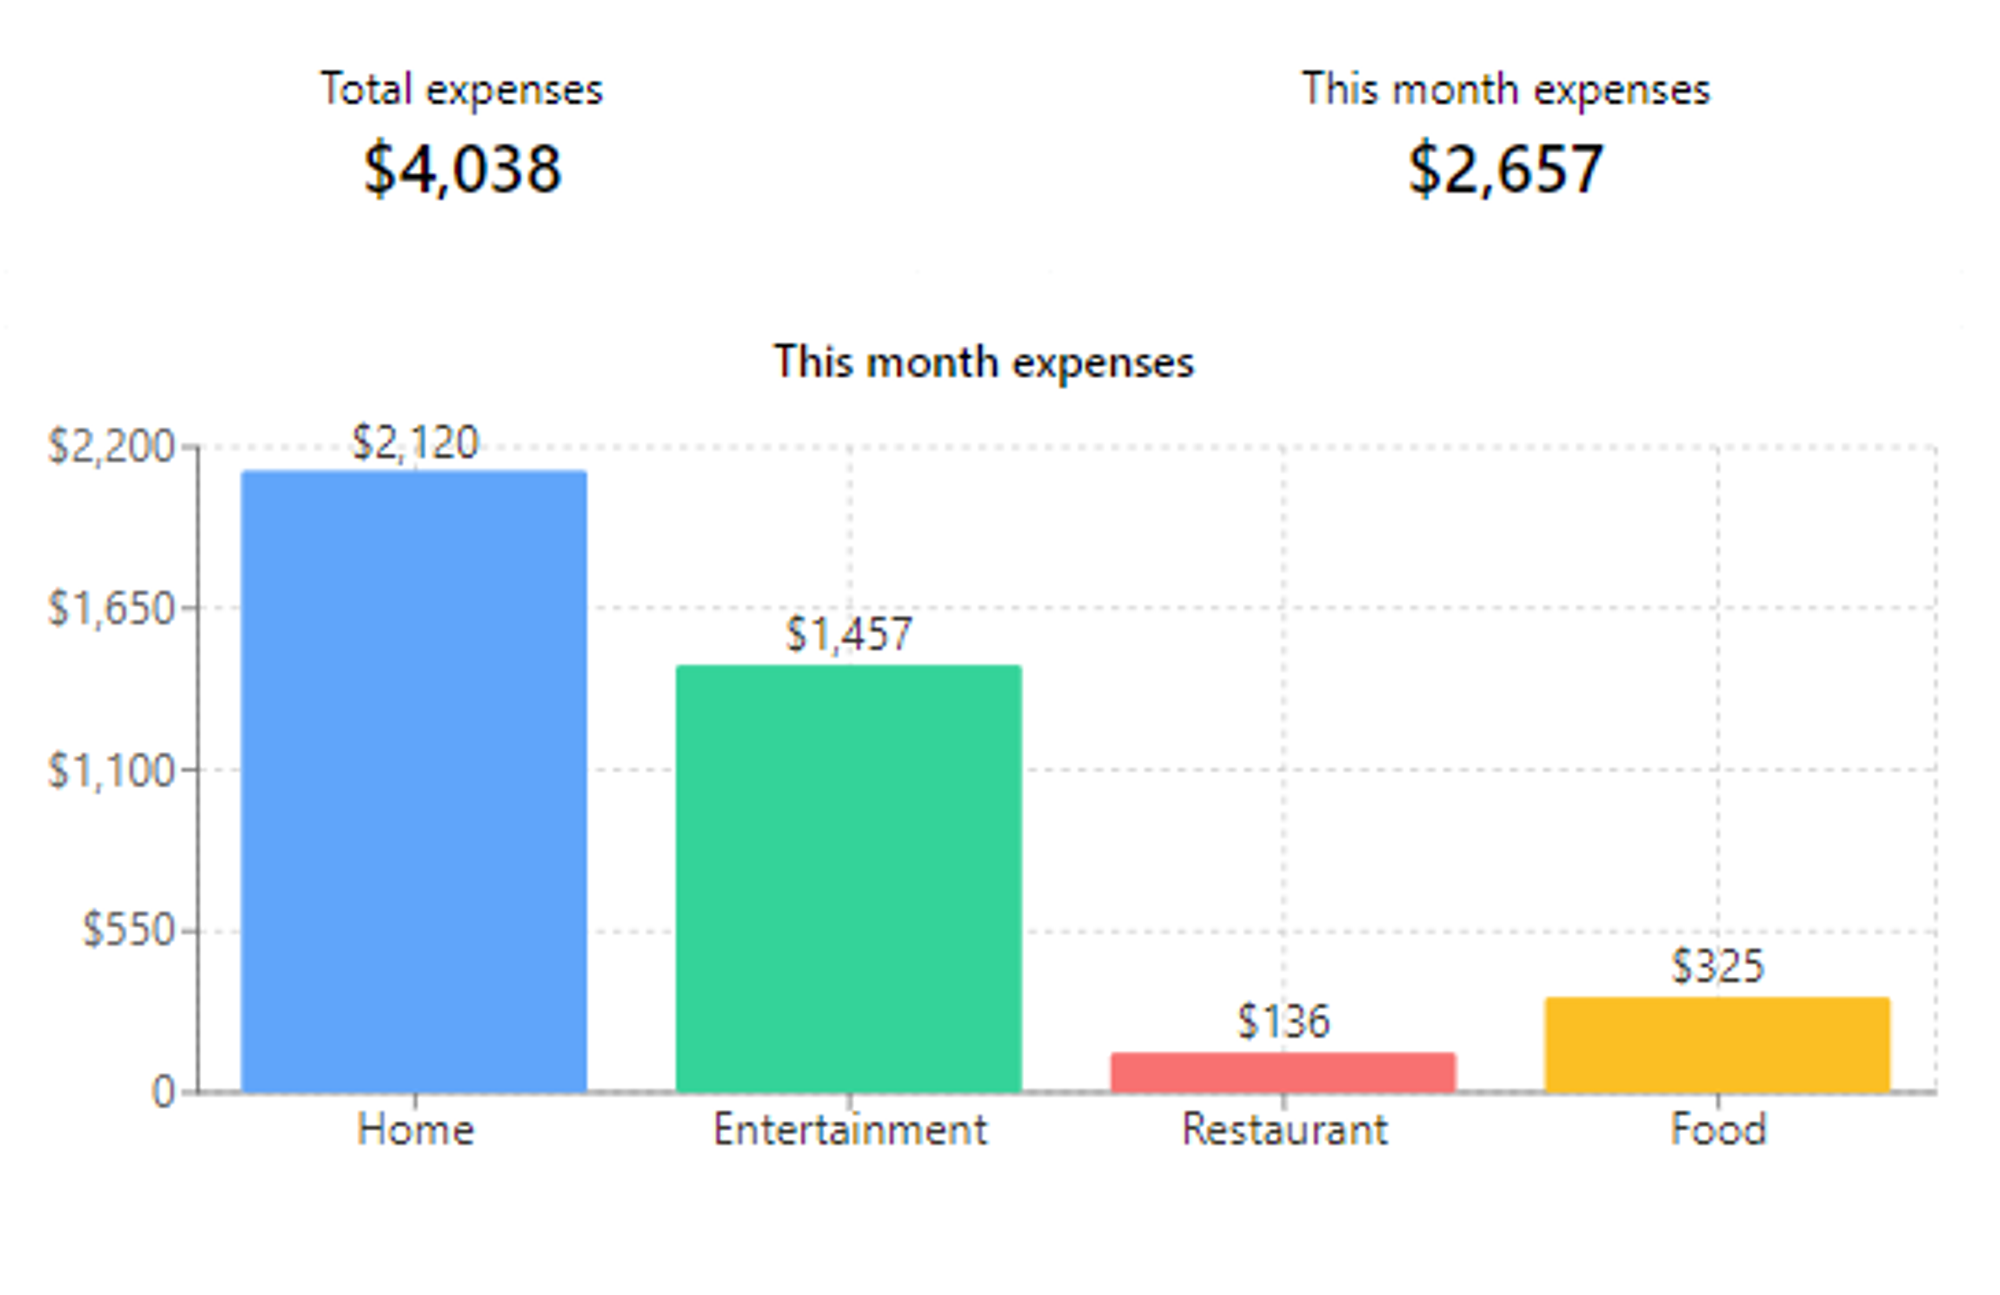 Here KPIs are the total expense and this month expense